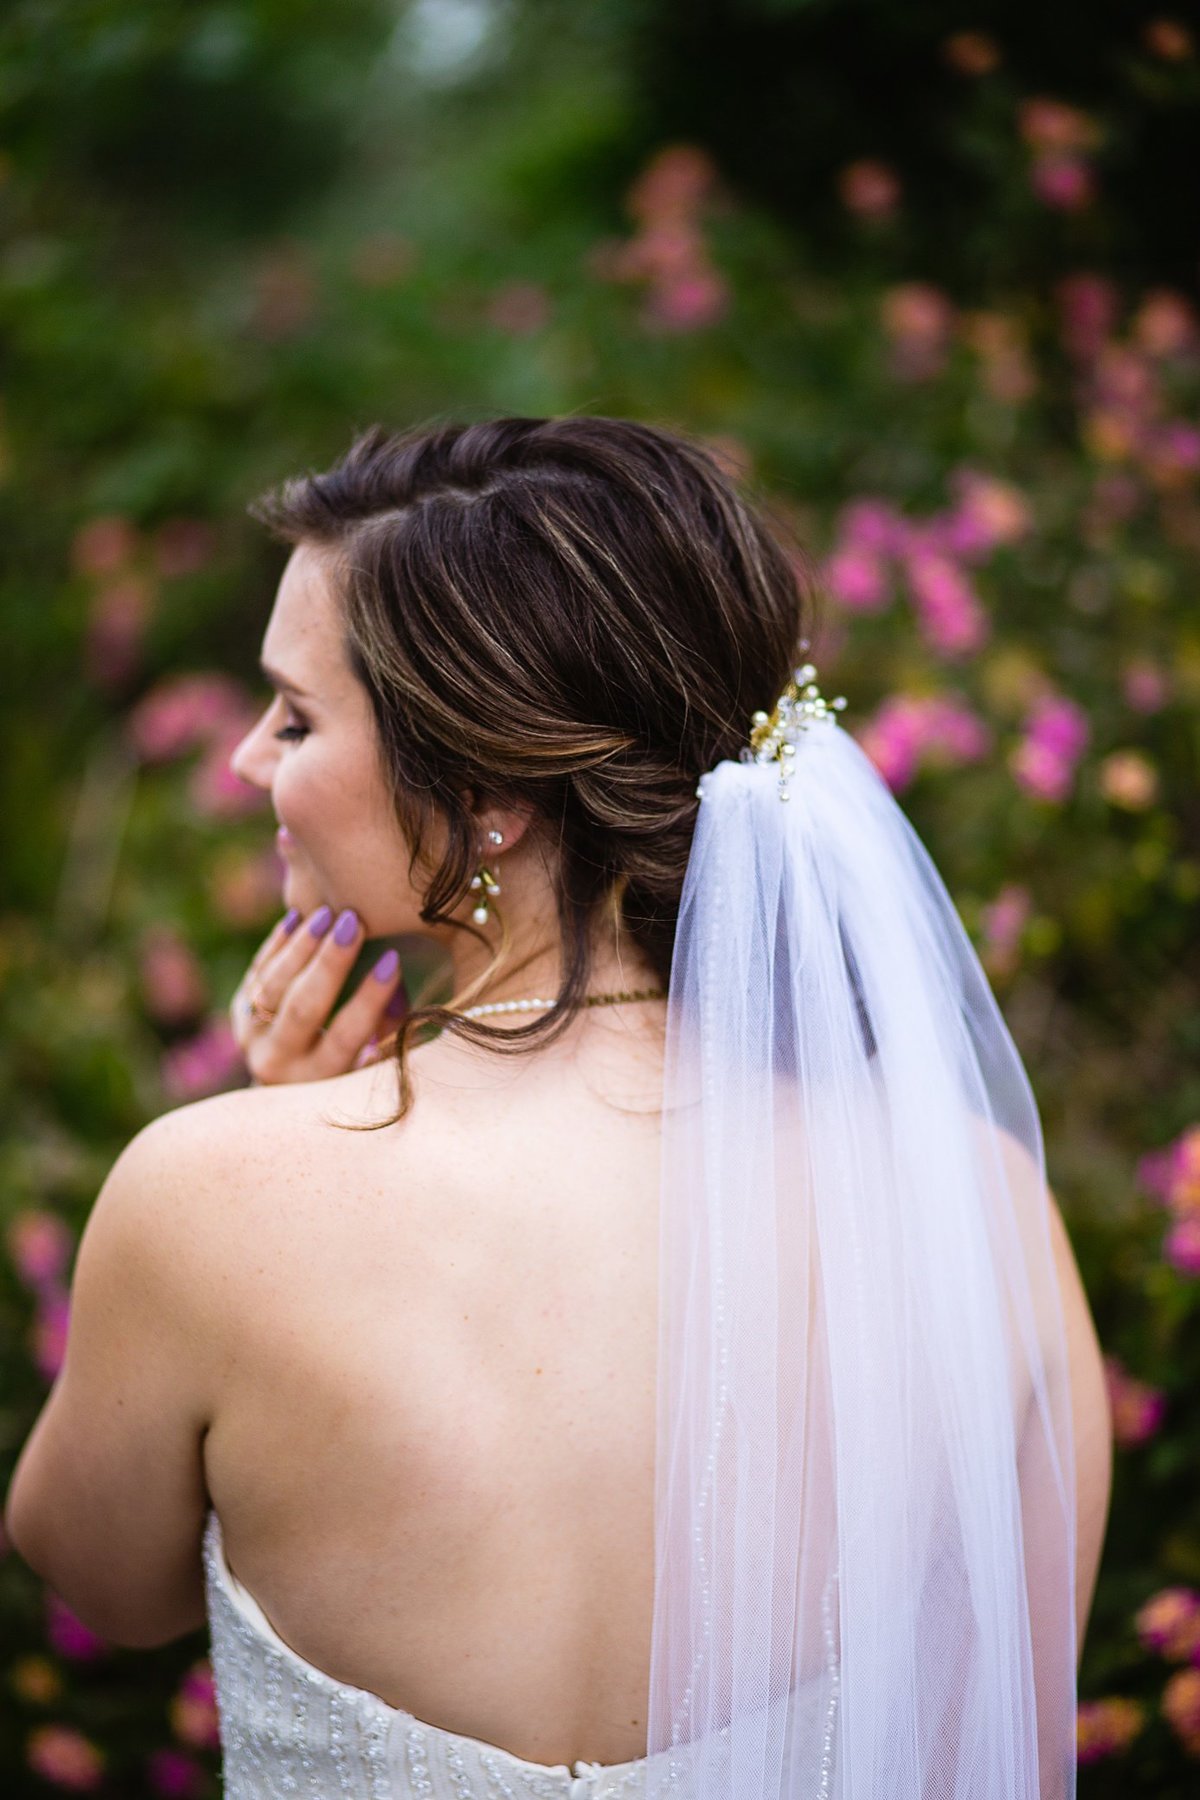 Detail image of the bride's hairstyle and veil in a garden by PMA Photography.